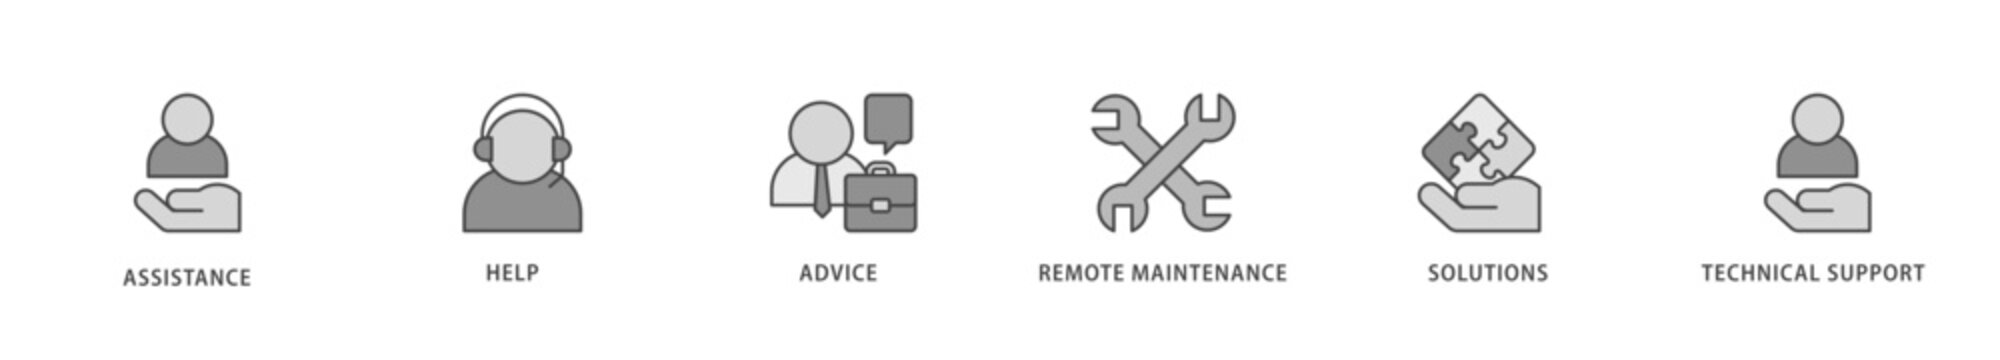 IT Expert icons set collection illustration of assistance, help, advice, remote maintenance, solutions and technical support icon live stroke and easy to edit 